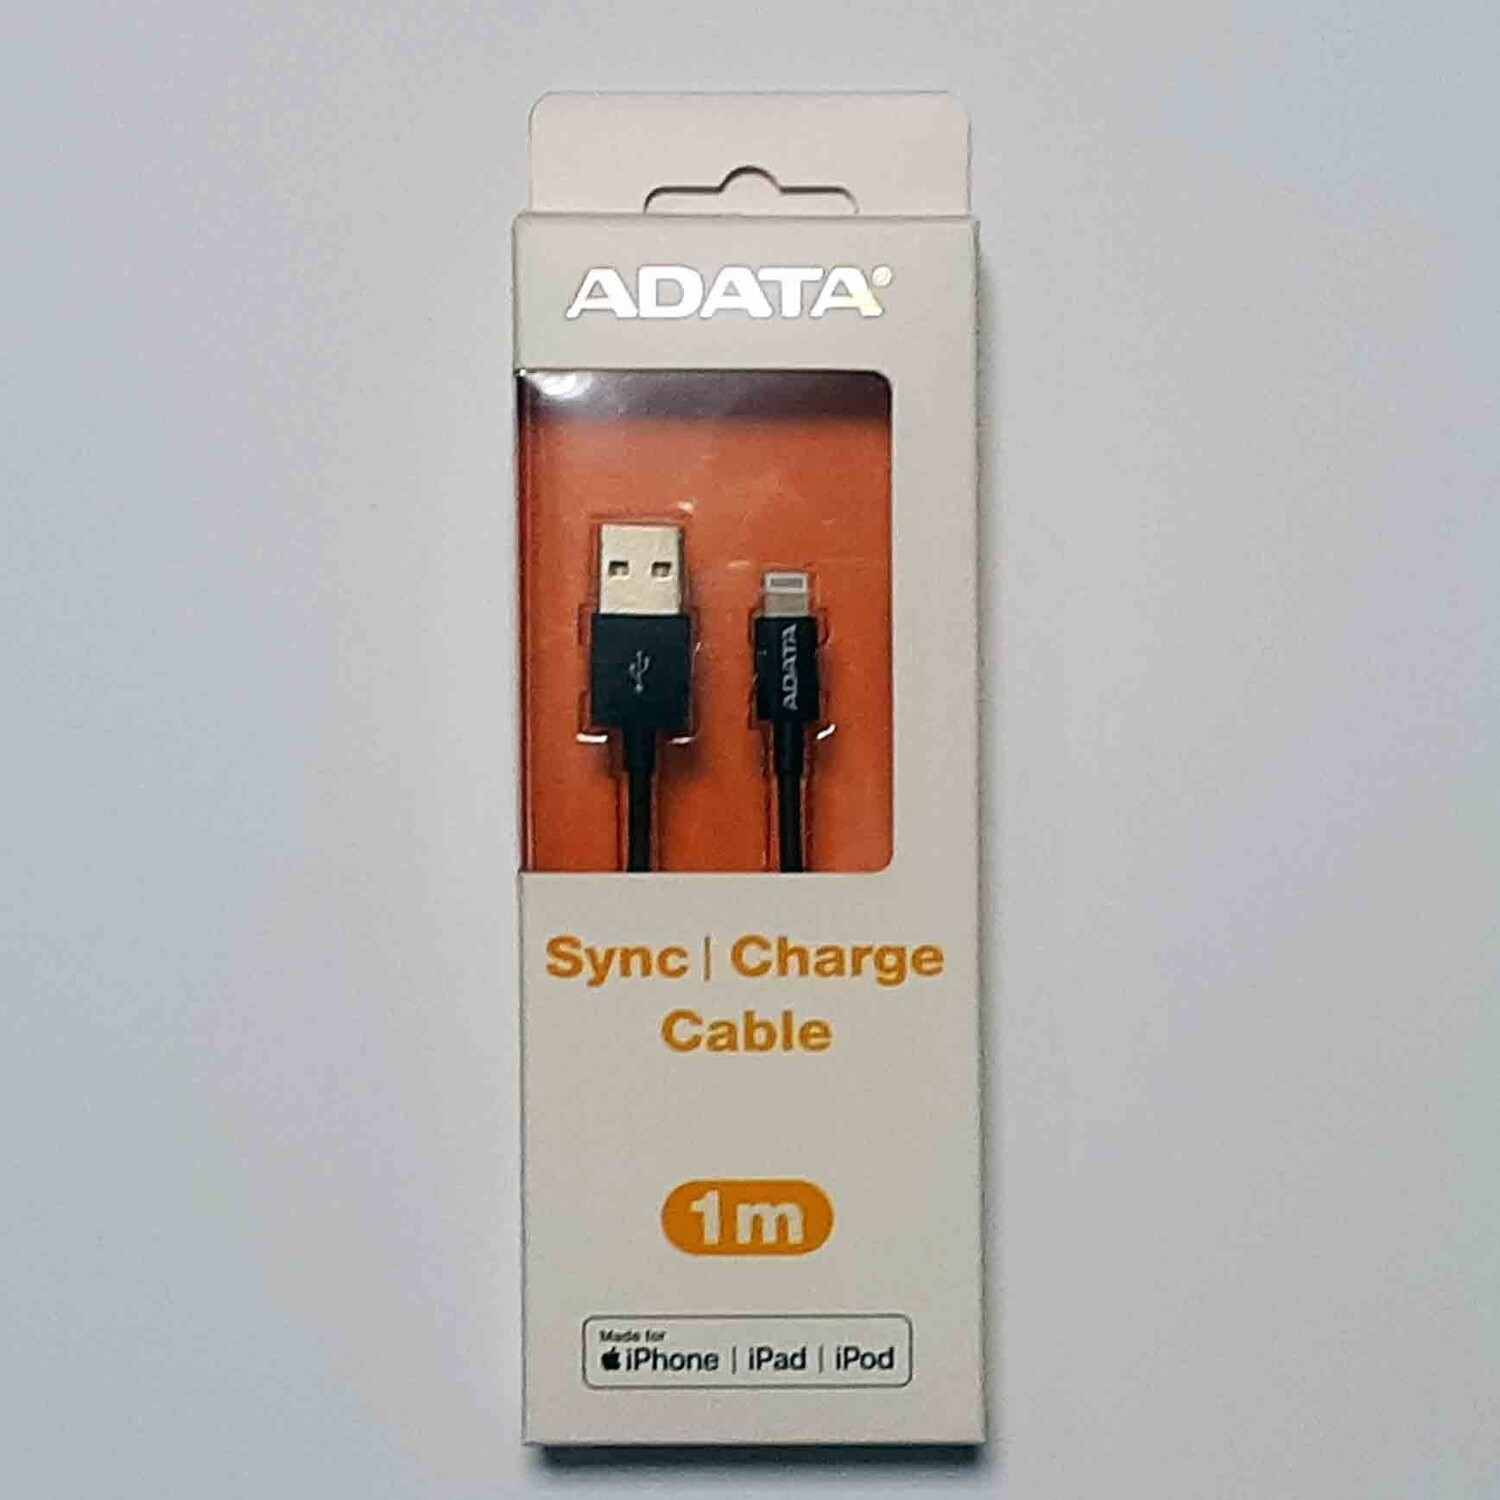 ADATA Sync / Charge Cable 1m (iPhone/iPad/iPod)